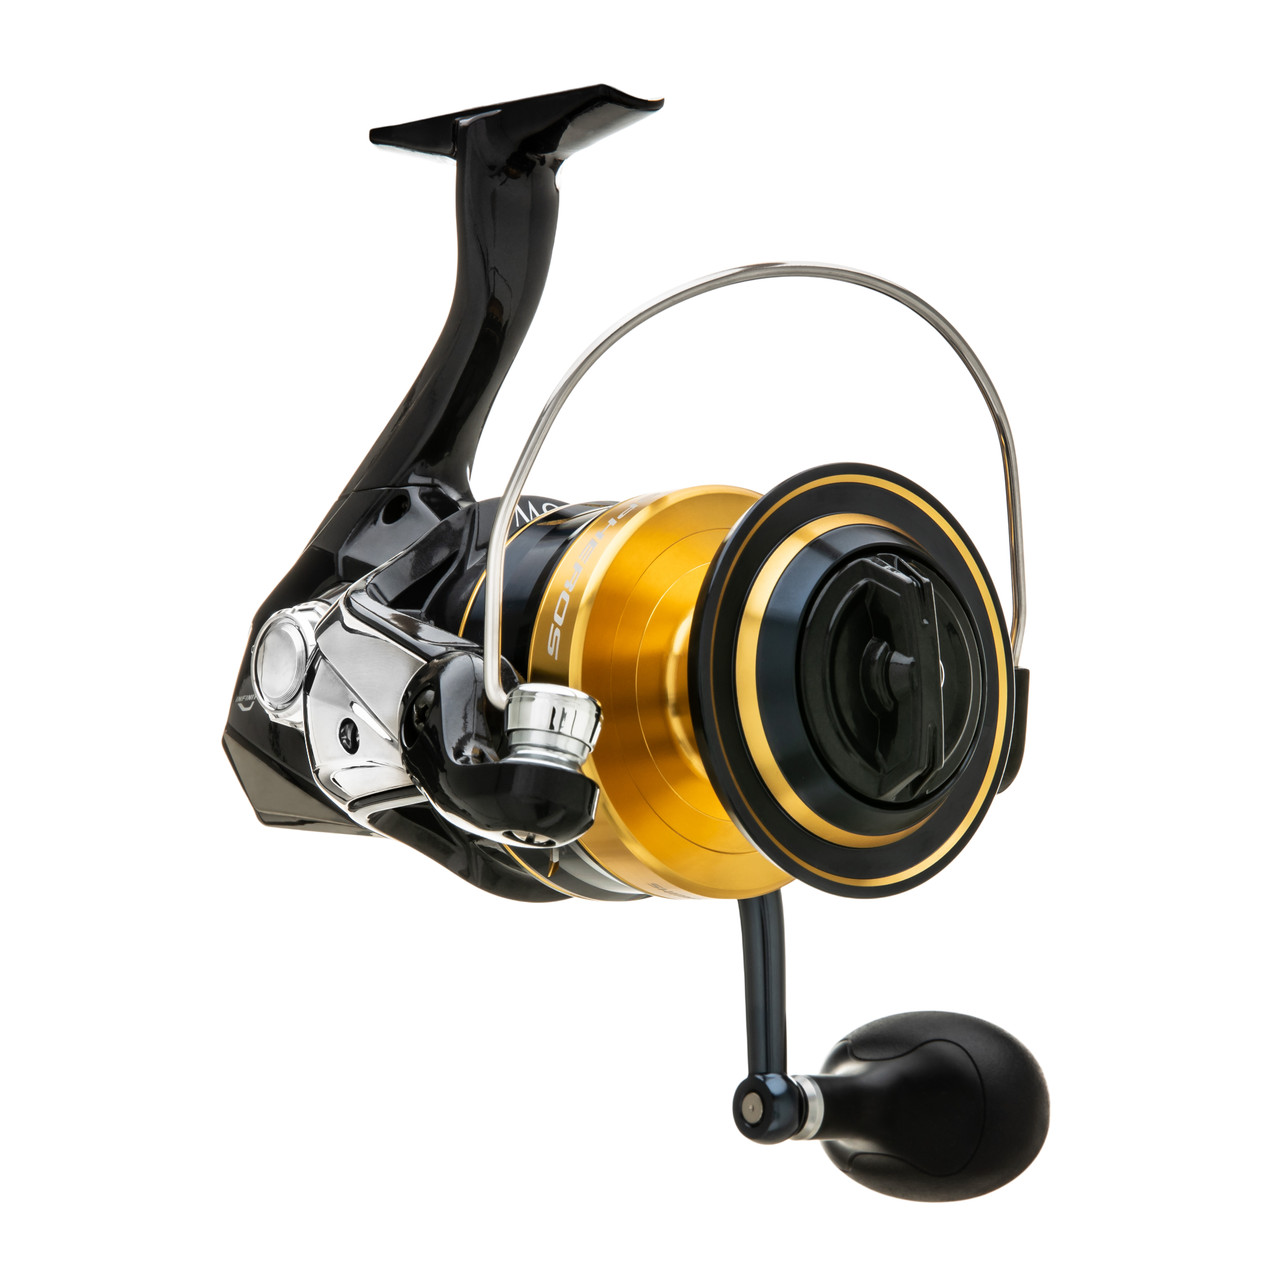 Relaxation fishing tackle - Shimano SPHEROS 8000FB - (SOLD) RM350